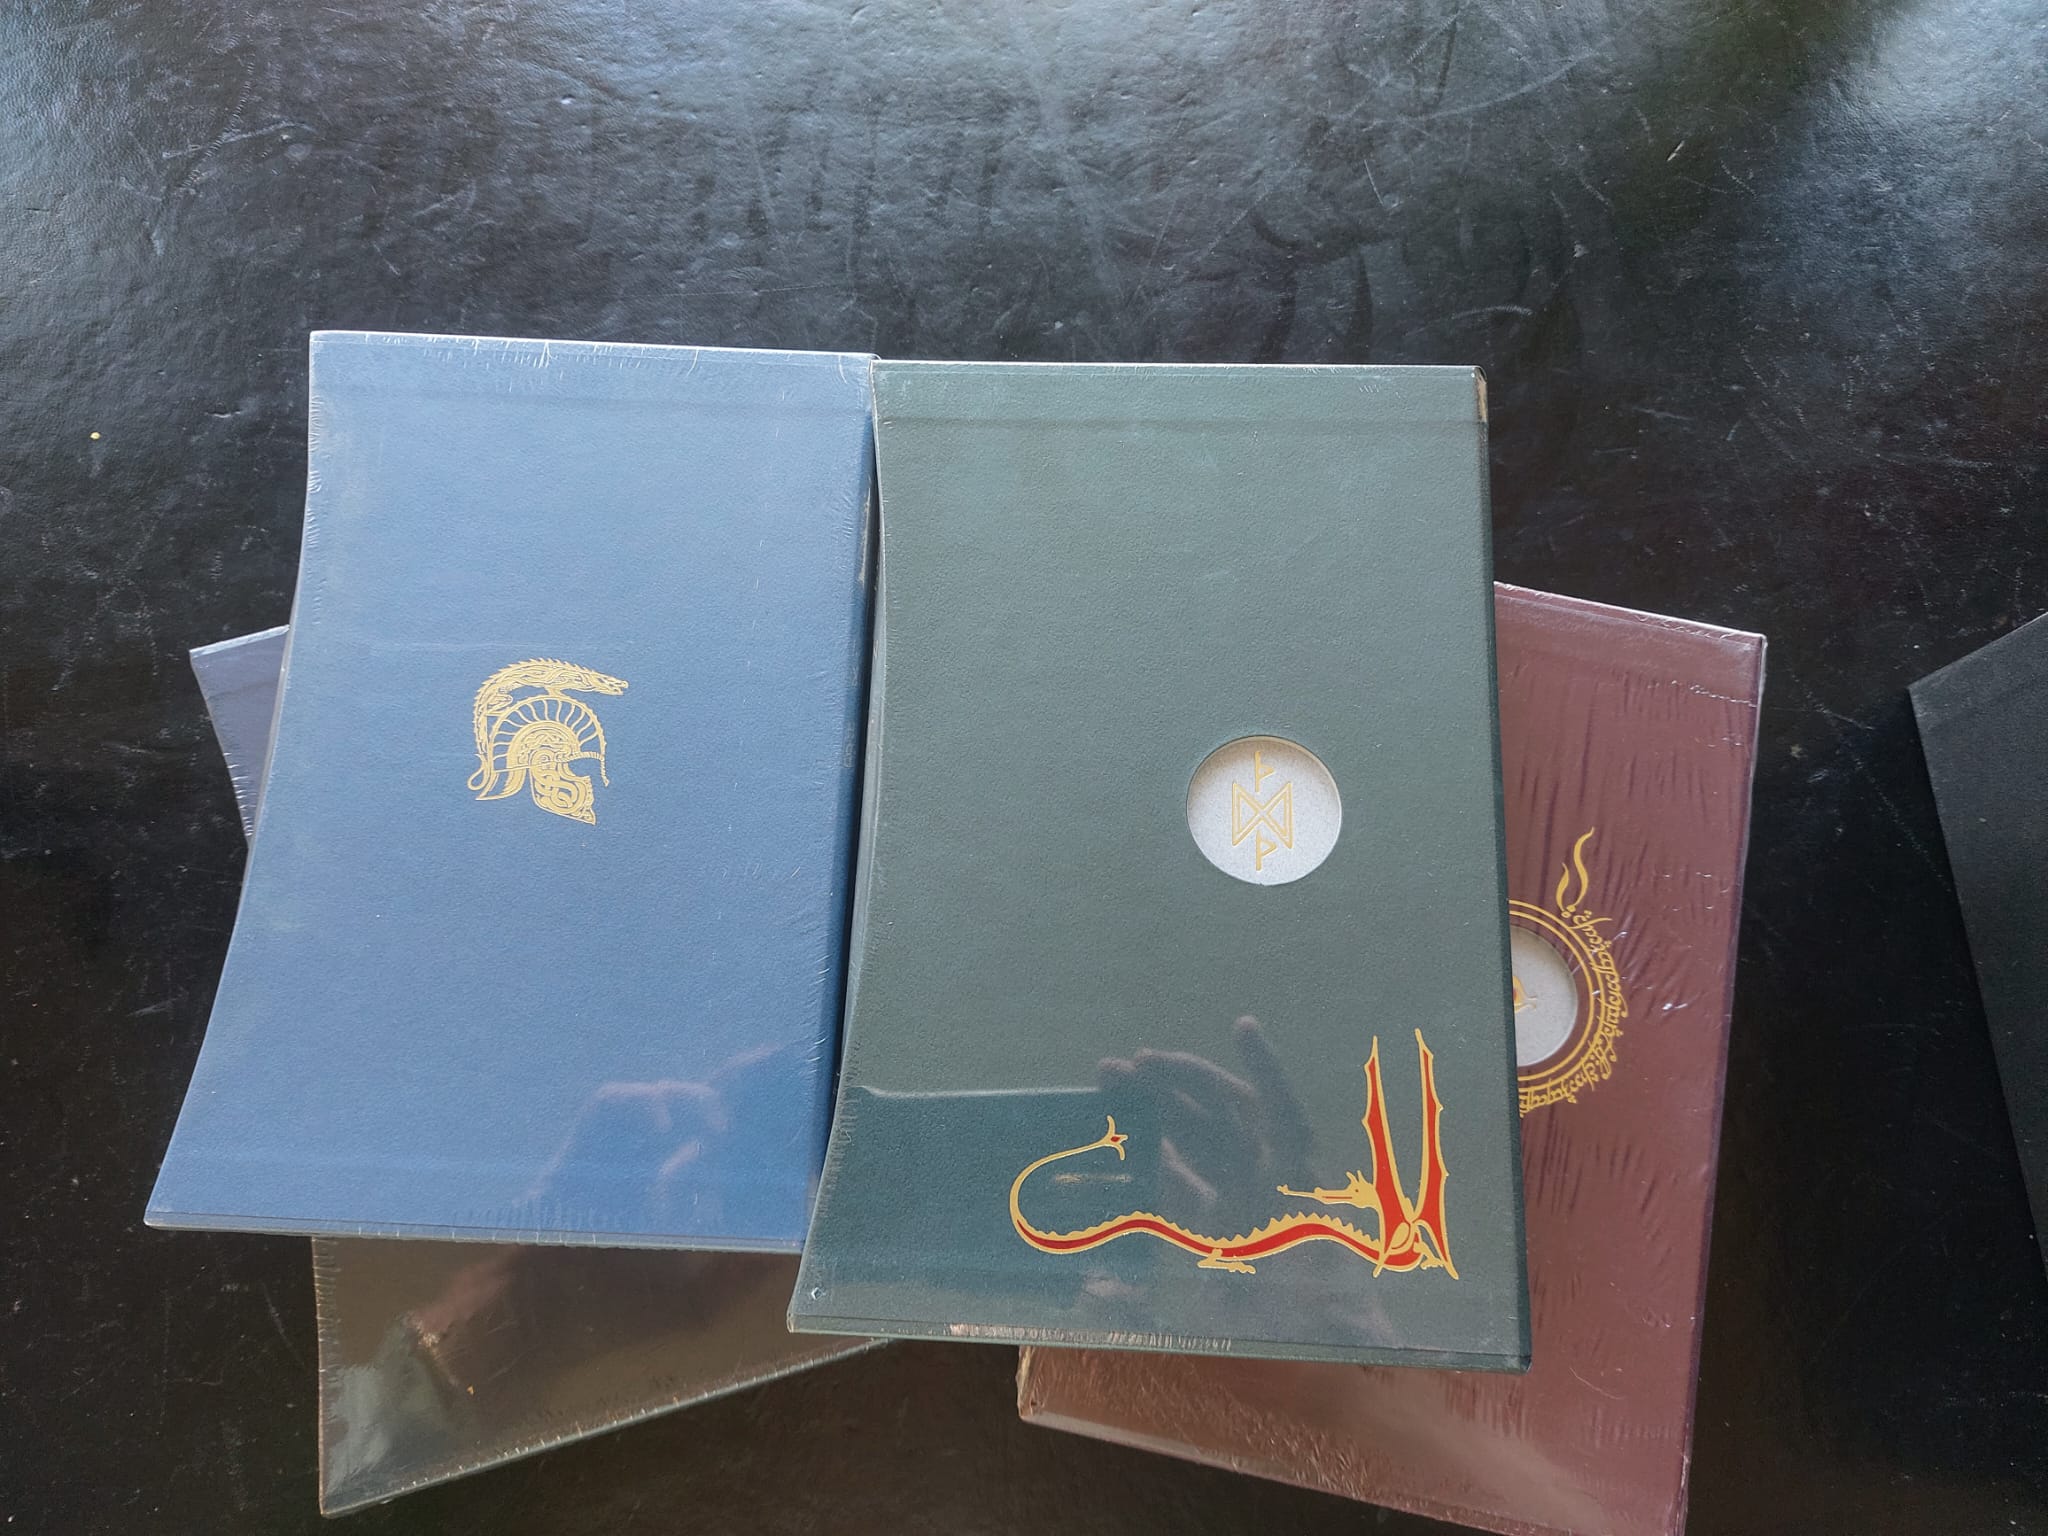 
The J.R.R. Tolkien Deluxe Edition Collection in Original Publishers Slipcase, Limited to 500 Sets 3